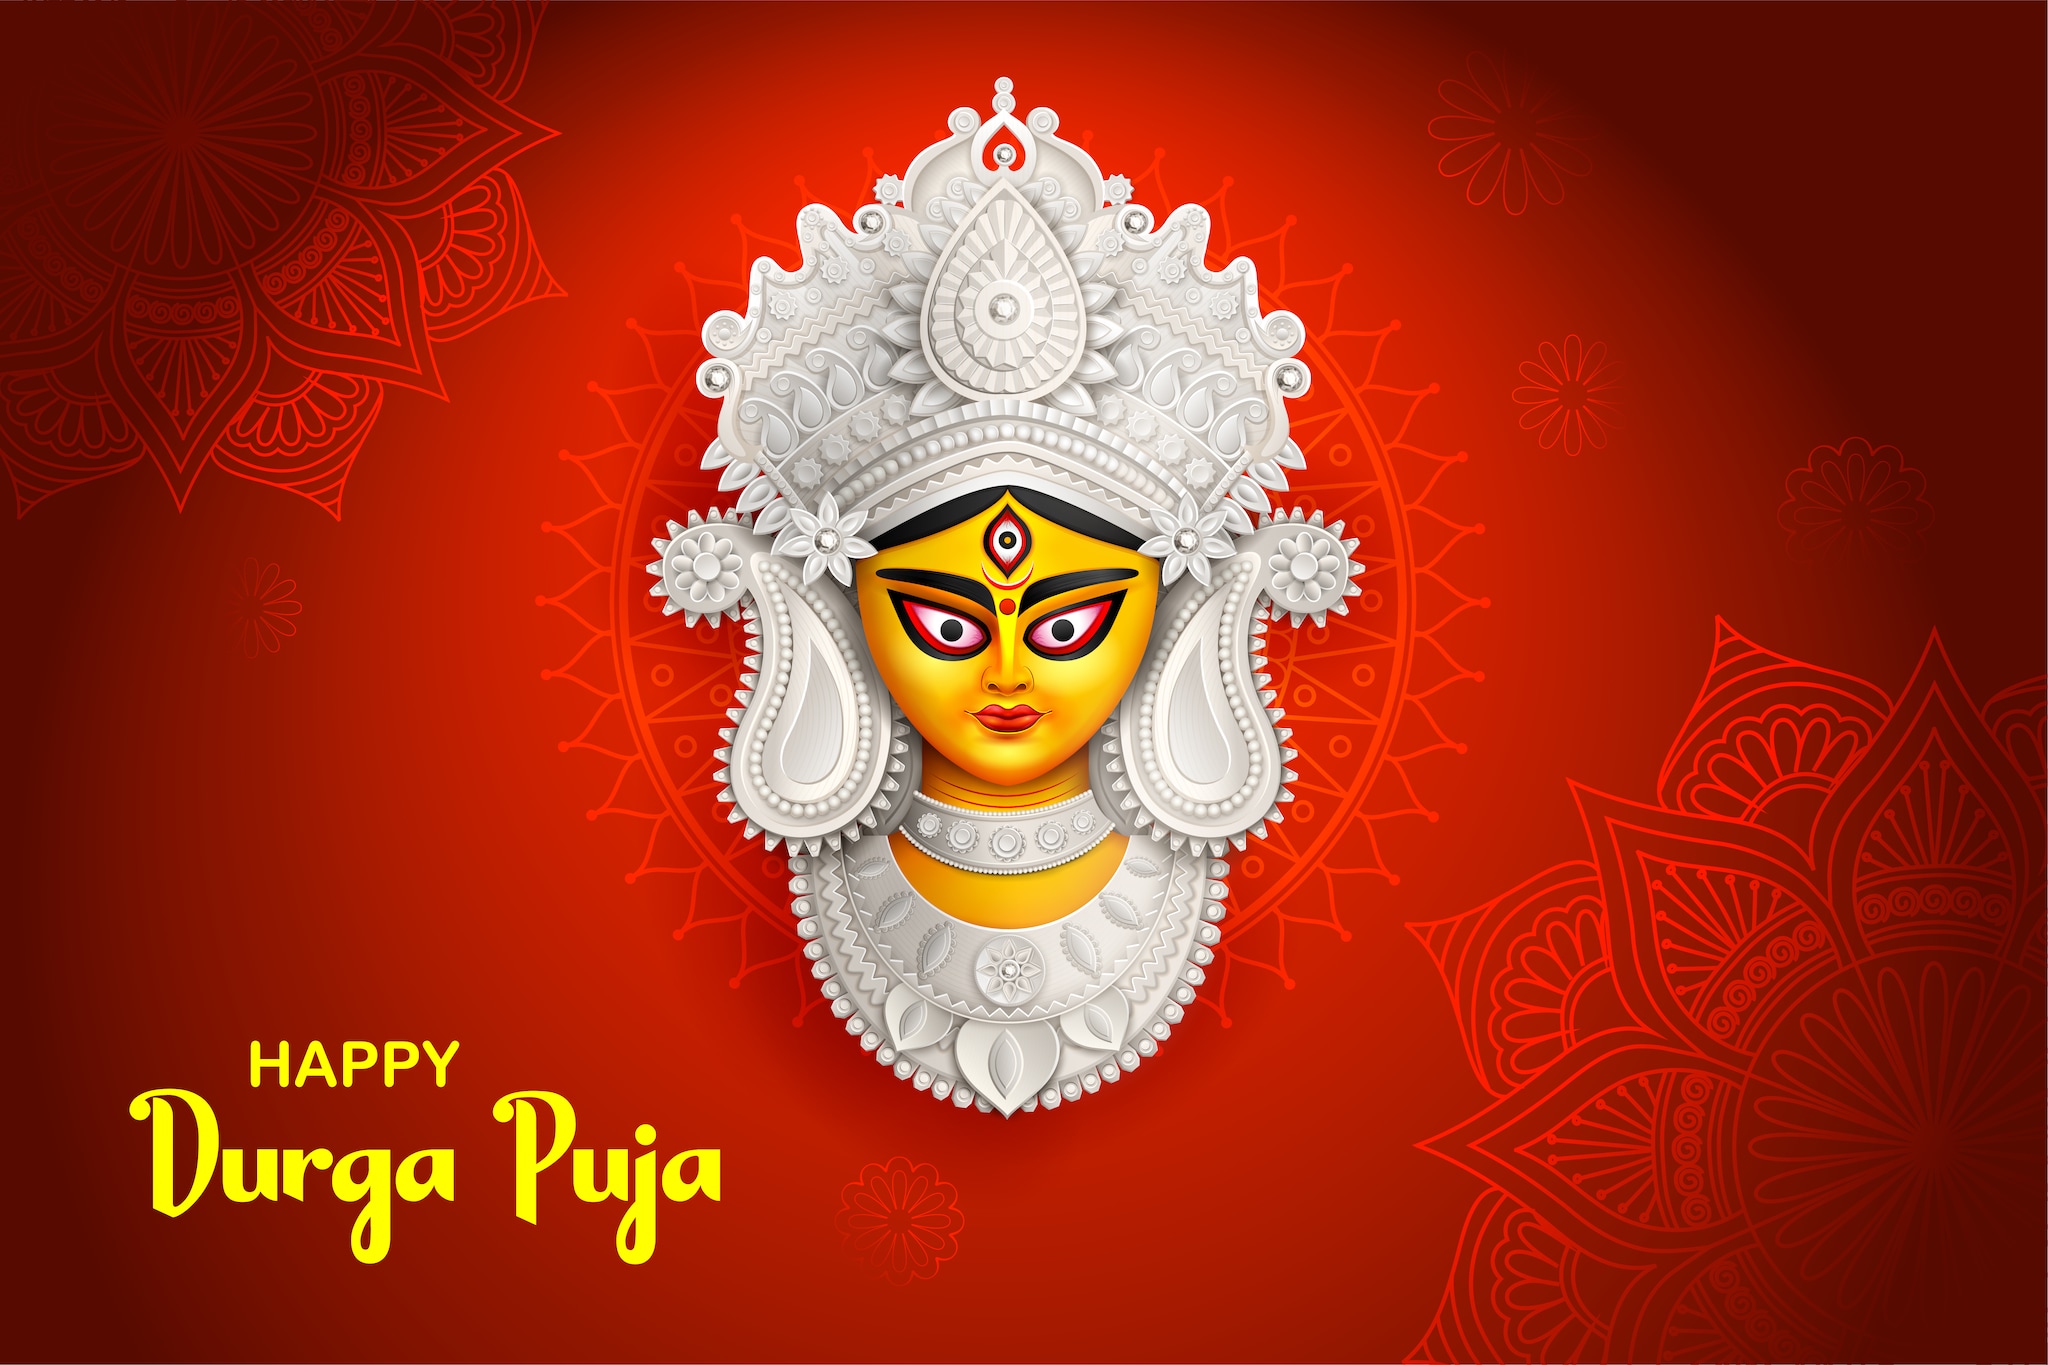 IN PICS | Happy Durga Puja 2022 Wishes, Images, Quotes, Messages, and  WhatsApp Status to Share